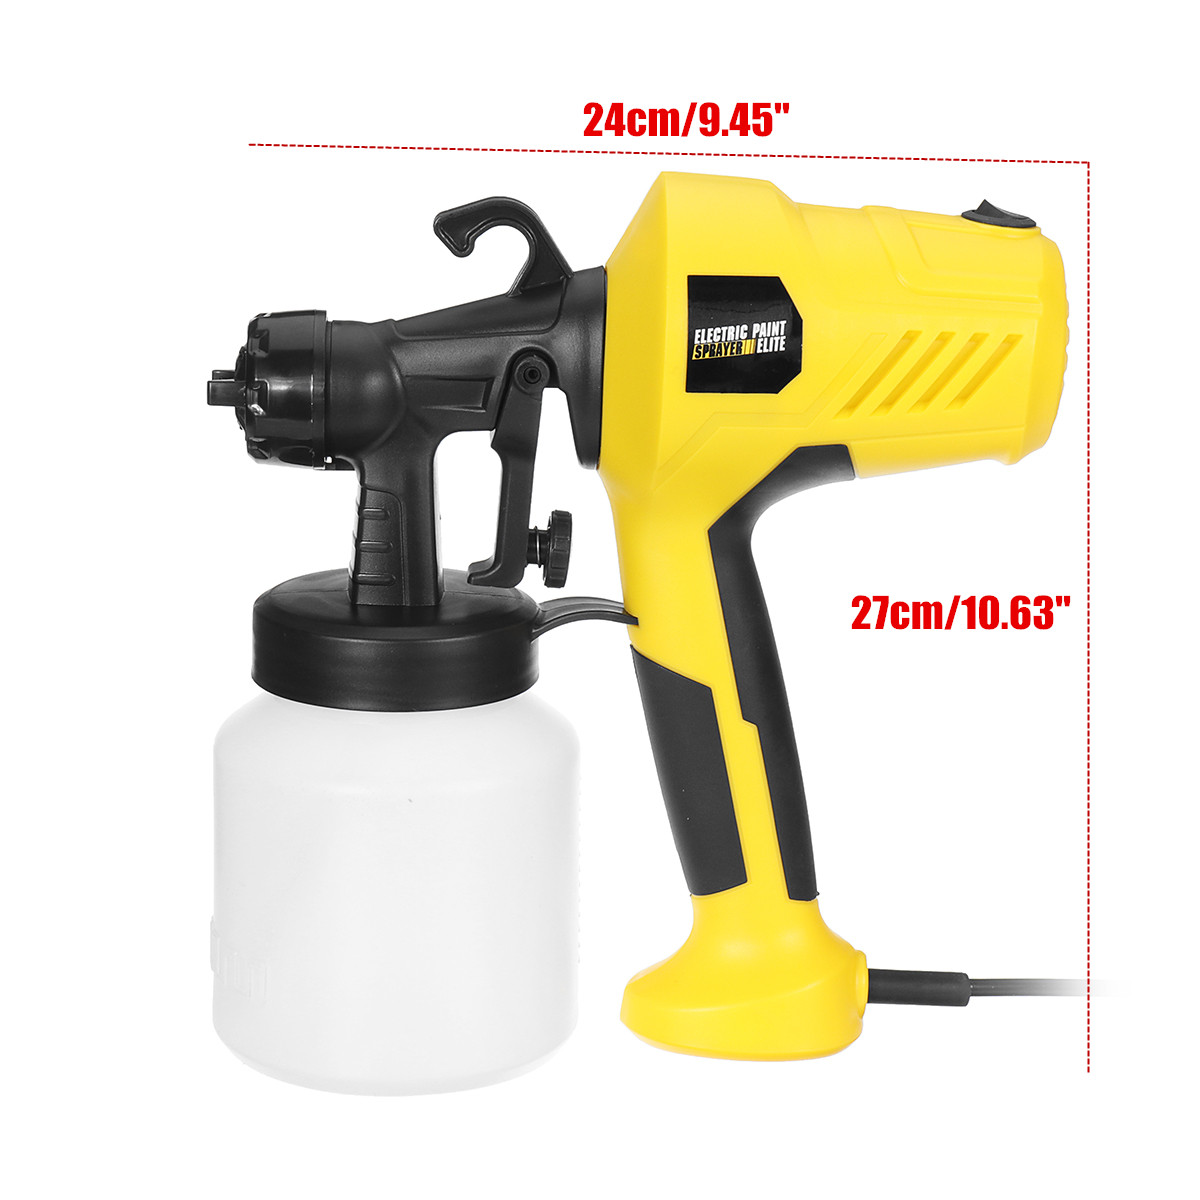 600W Electric Spray Paint Sprayer For Cars Wood Furniture Wall Woodworking 28